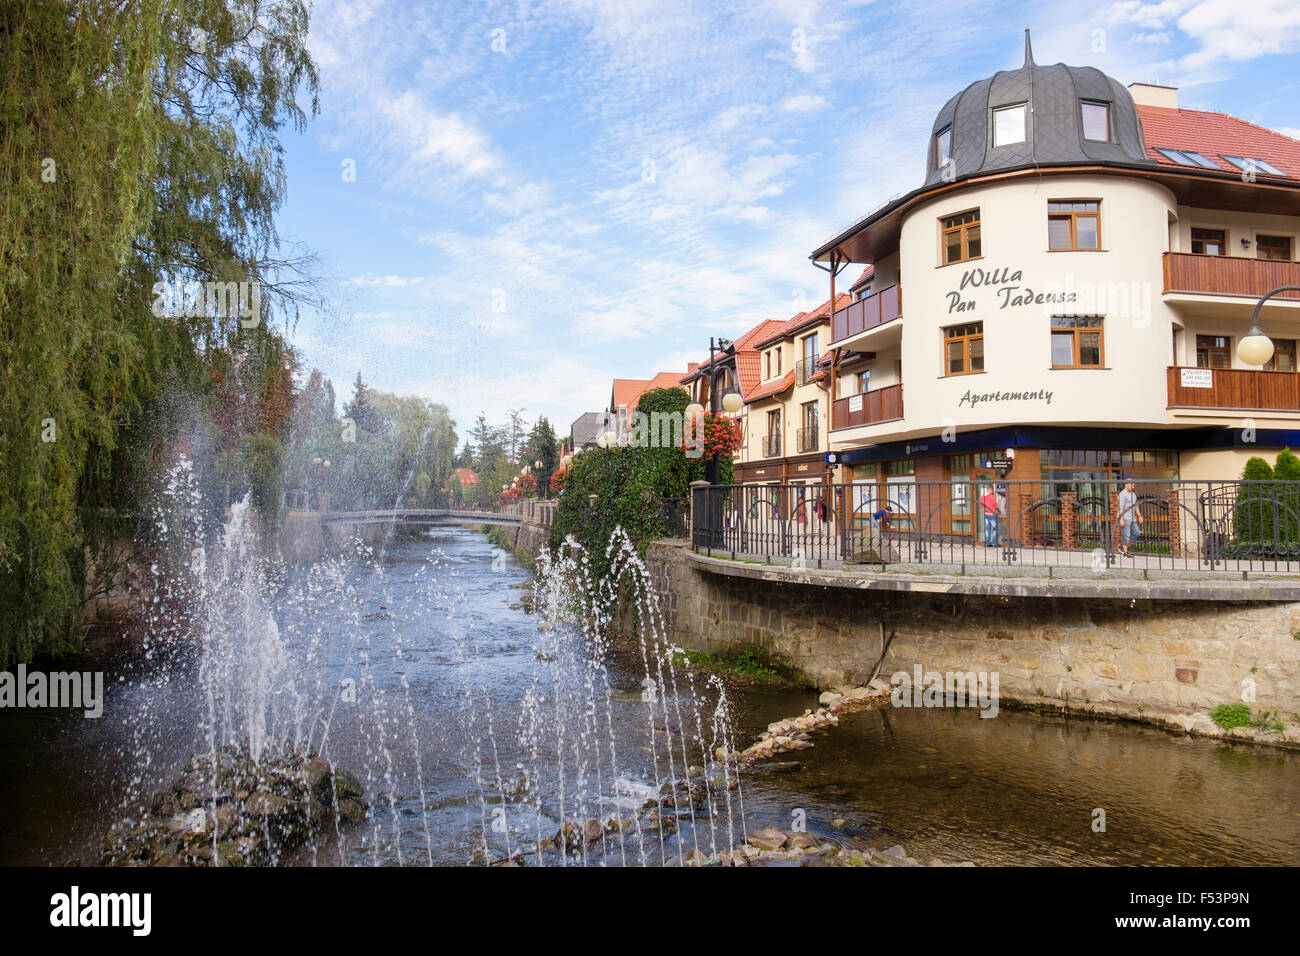 Water feature on Bystrzyca Dusznicka river with shops in centre of piedmont spa town. Polanica-Zdroj, Lower Silesia, Poland Stock Photo